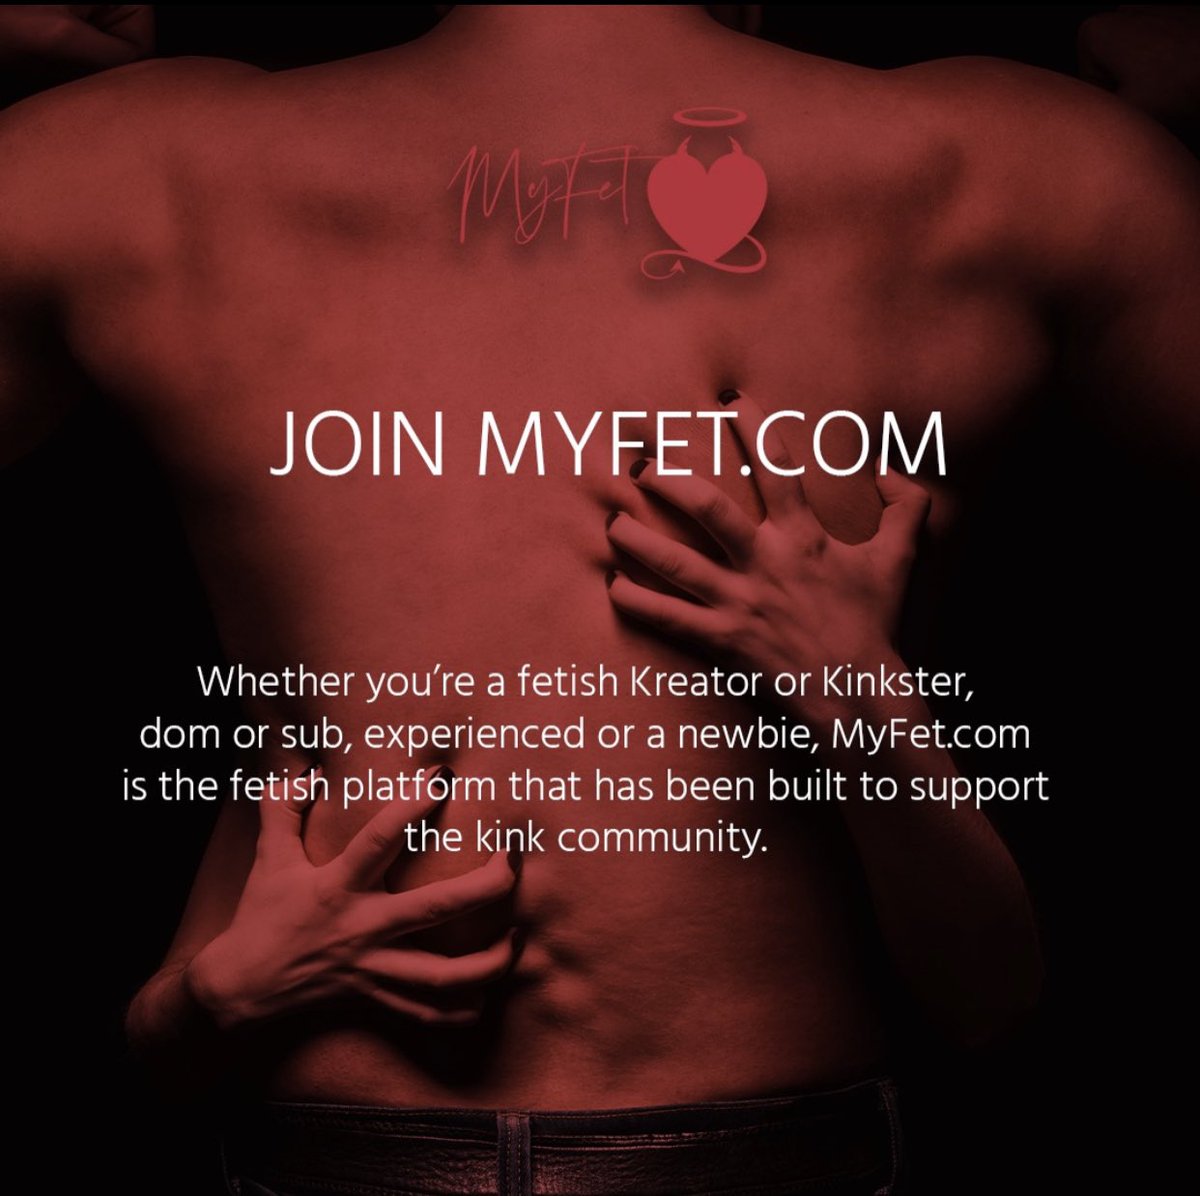 Join myfet.com today ❤️ 90% payouts ❤️ 121 support from humans ❤️ MyFet Clip Store ❤️ Fully focused and branded the for fetish world ❤️ 1000s of kinky fans waiting to subscribe and buy